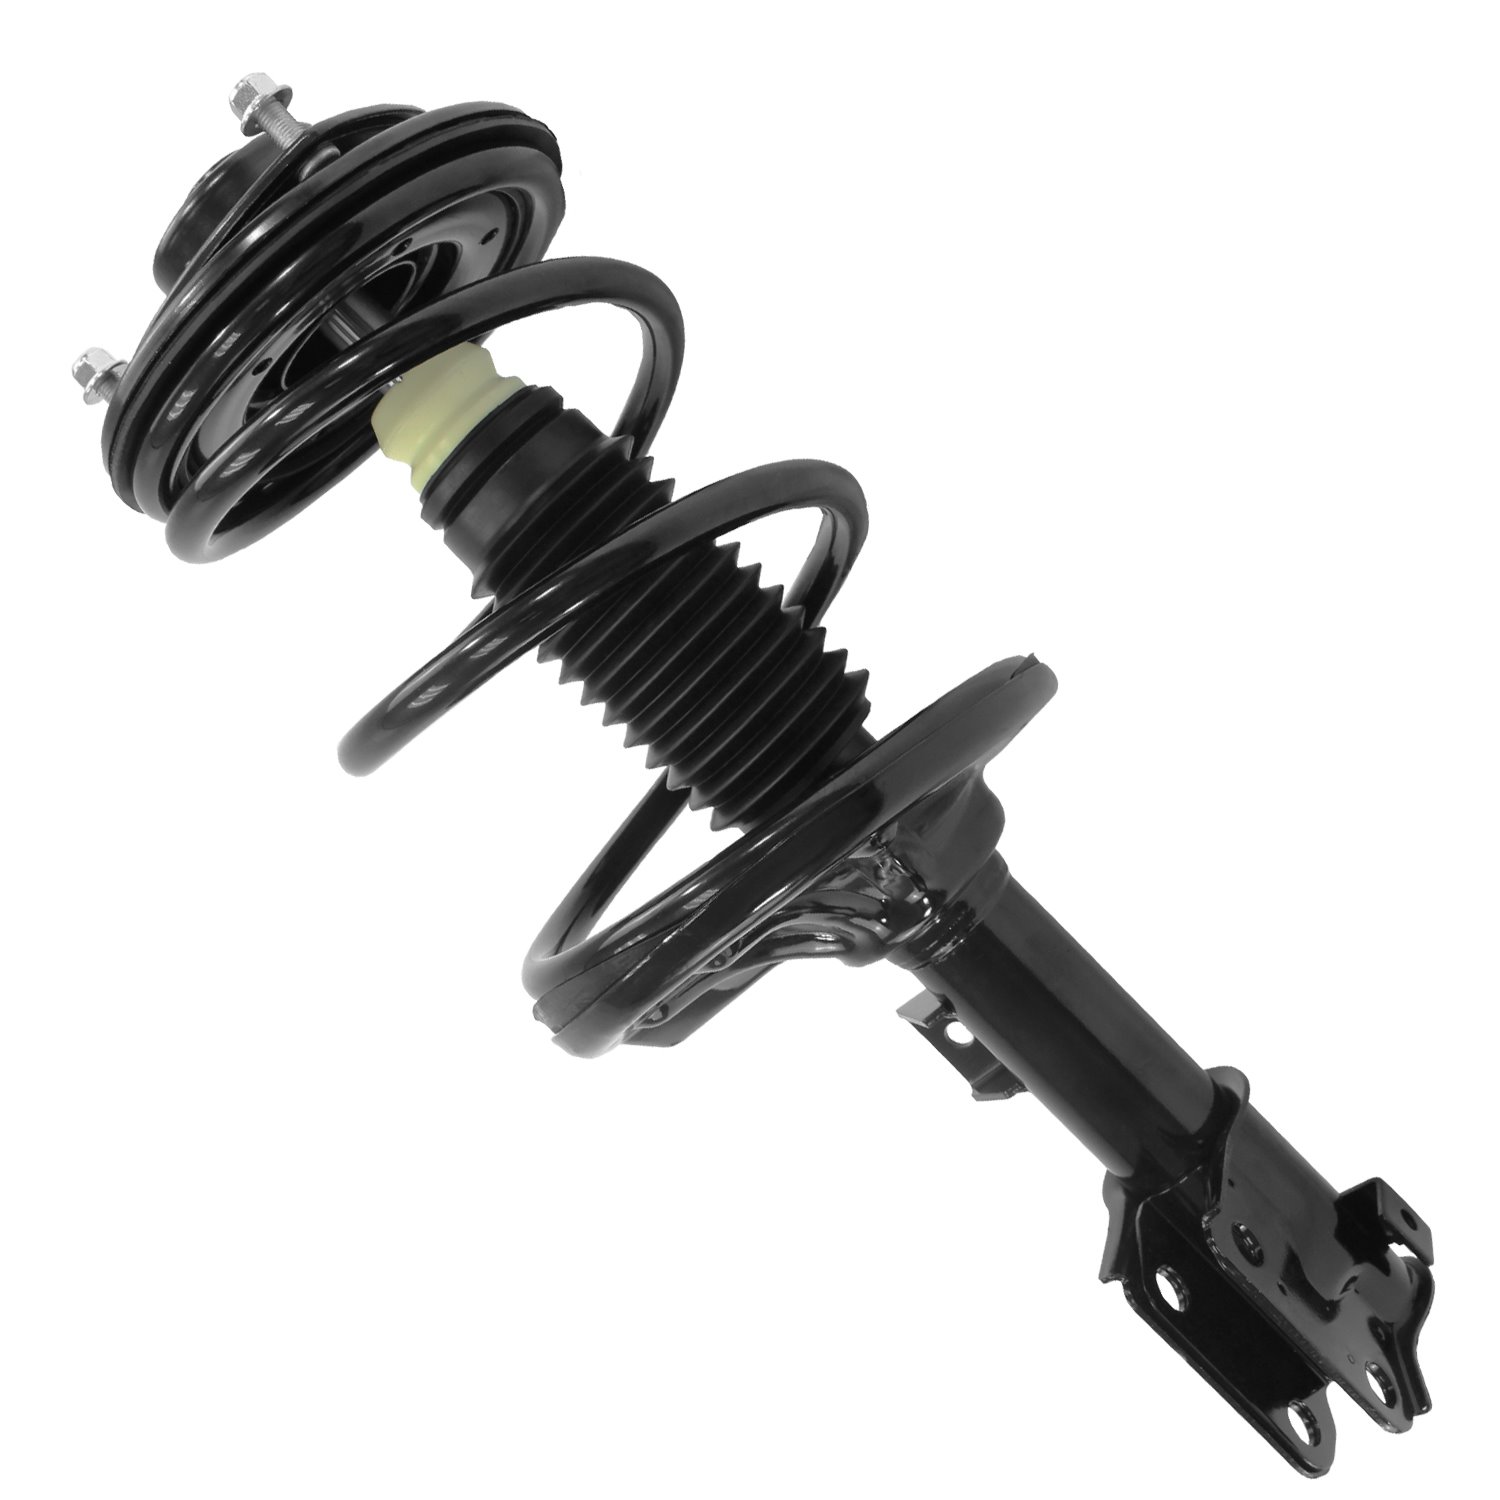 13701 Front Suspension Strut & Coil Spring Assemby Fits Select Mitsubishi Eclipse